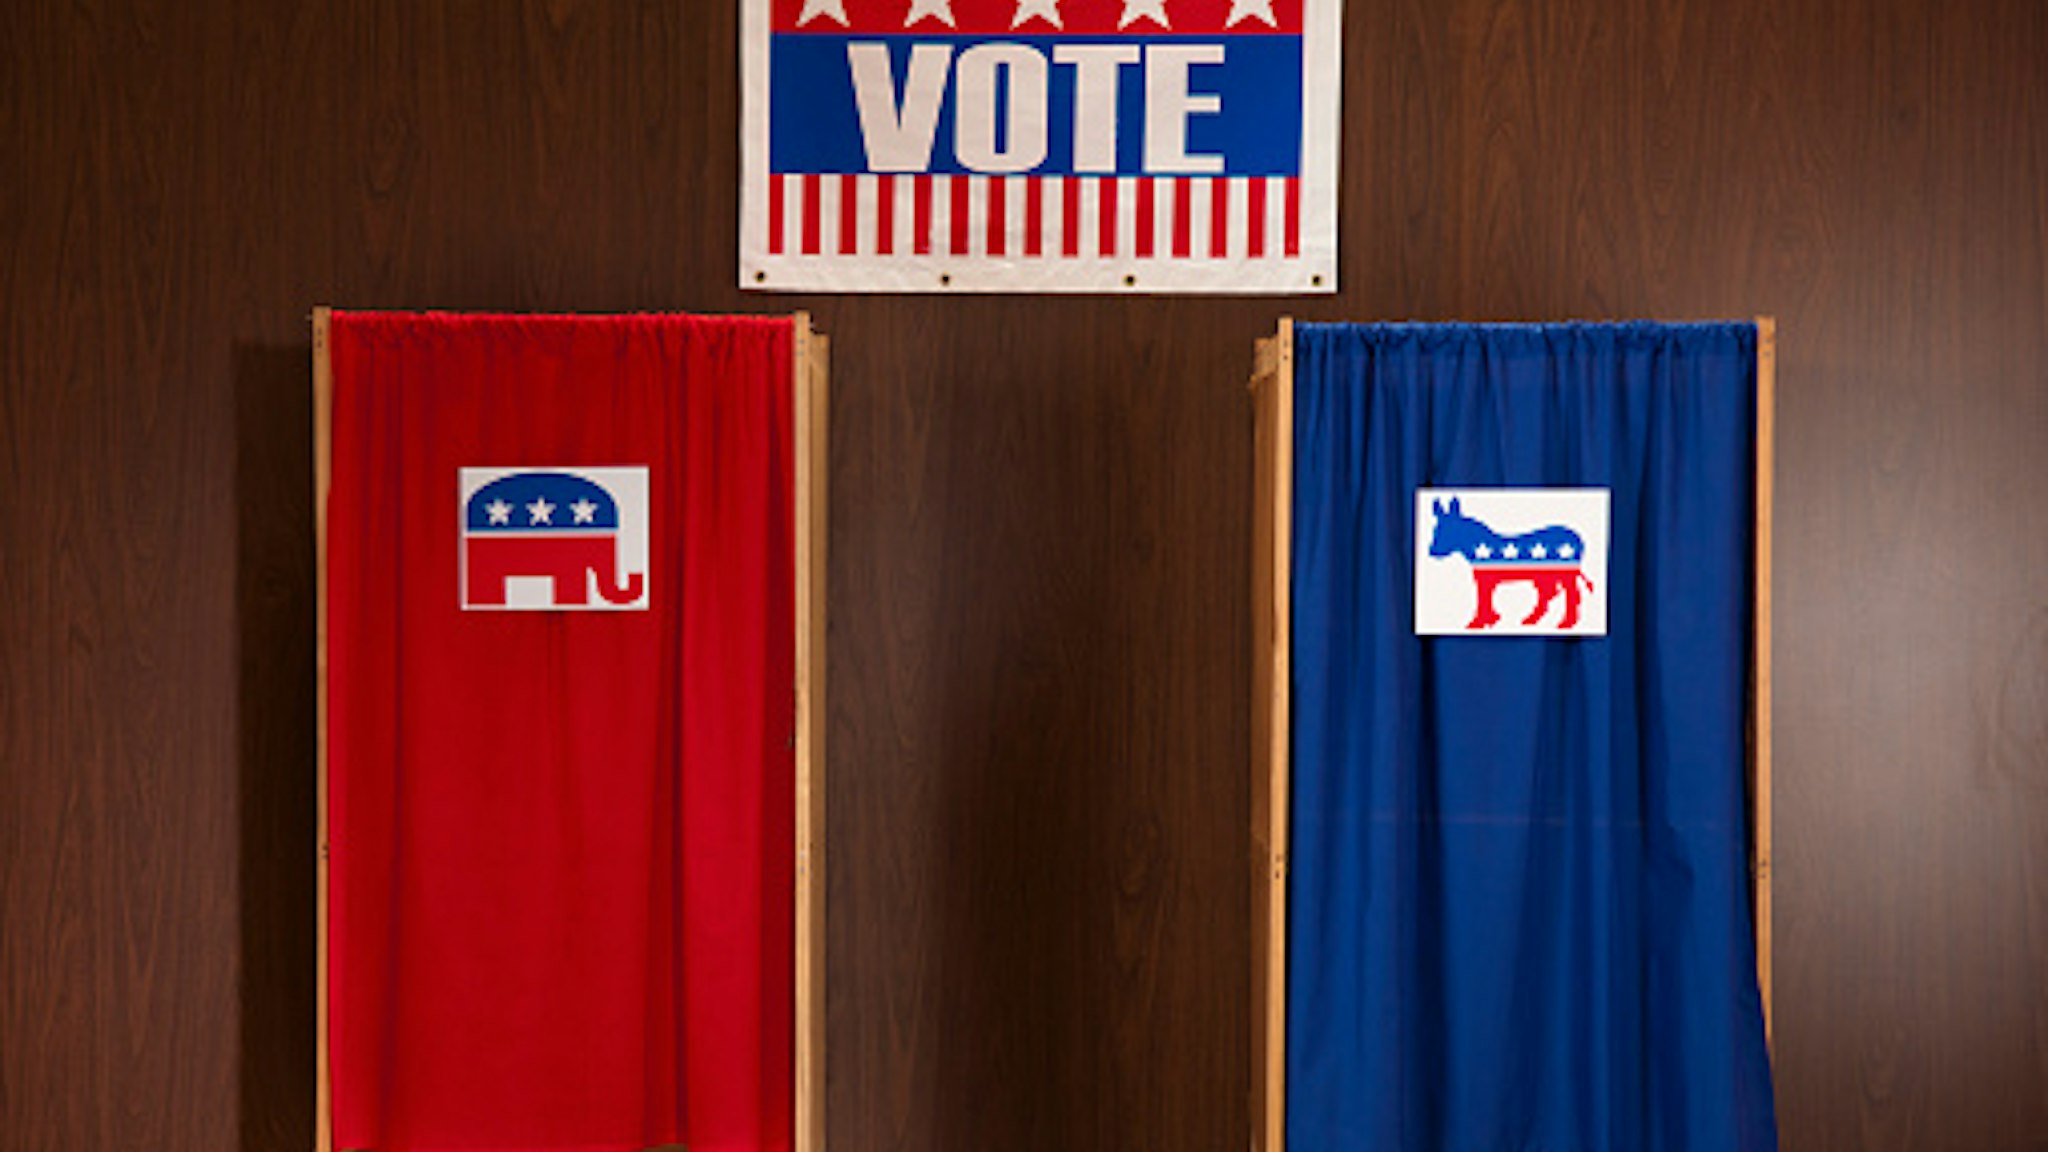 Voting booths in polling place - stock photo